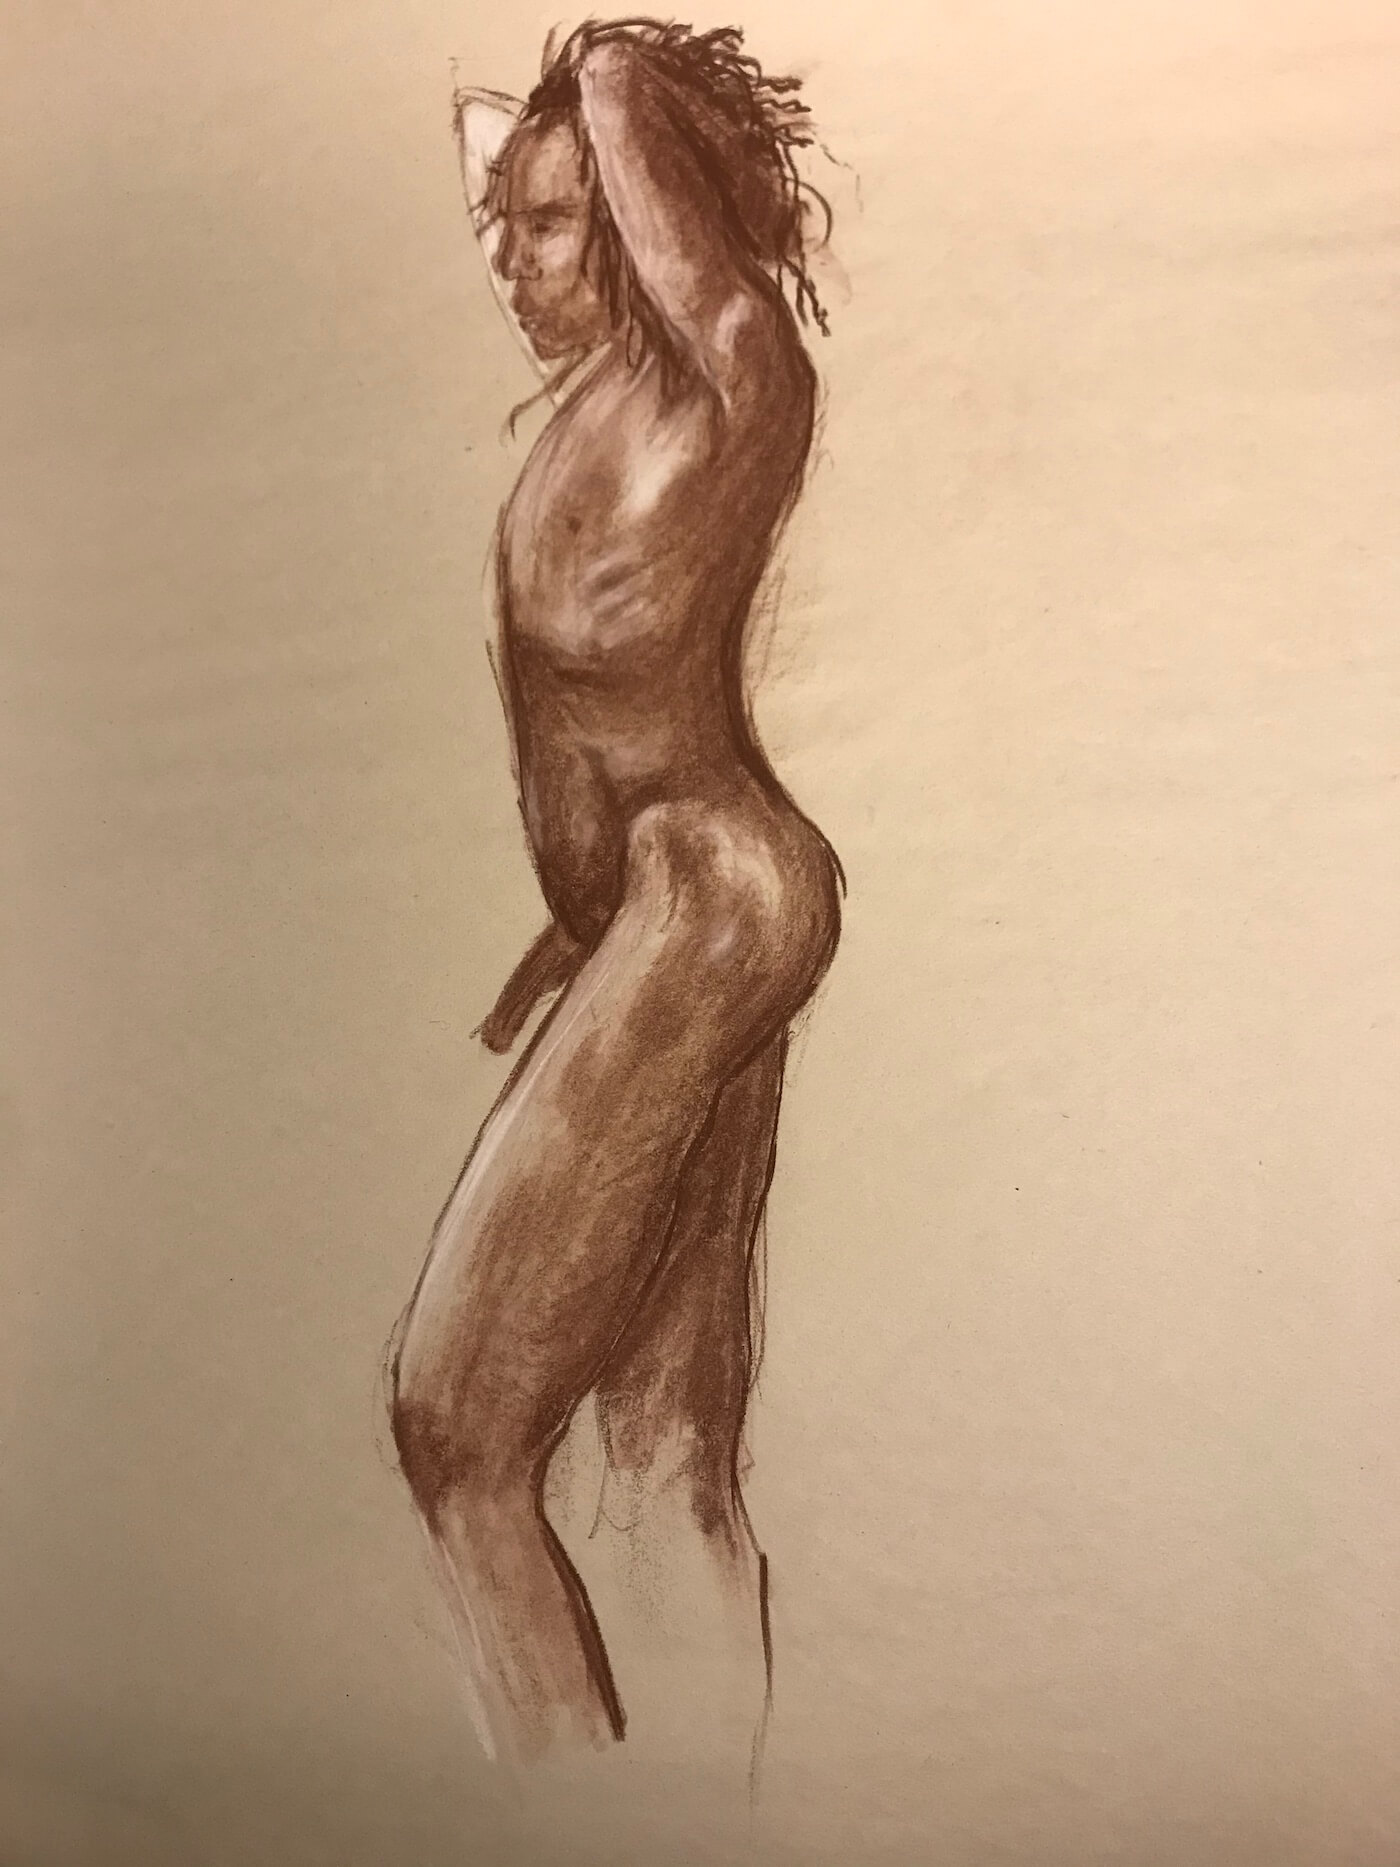 Drawing day: live model. Conte and graphite on paper .  9x11